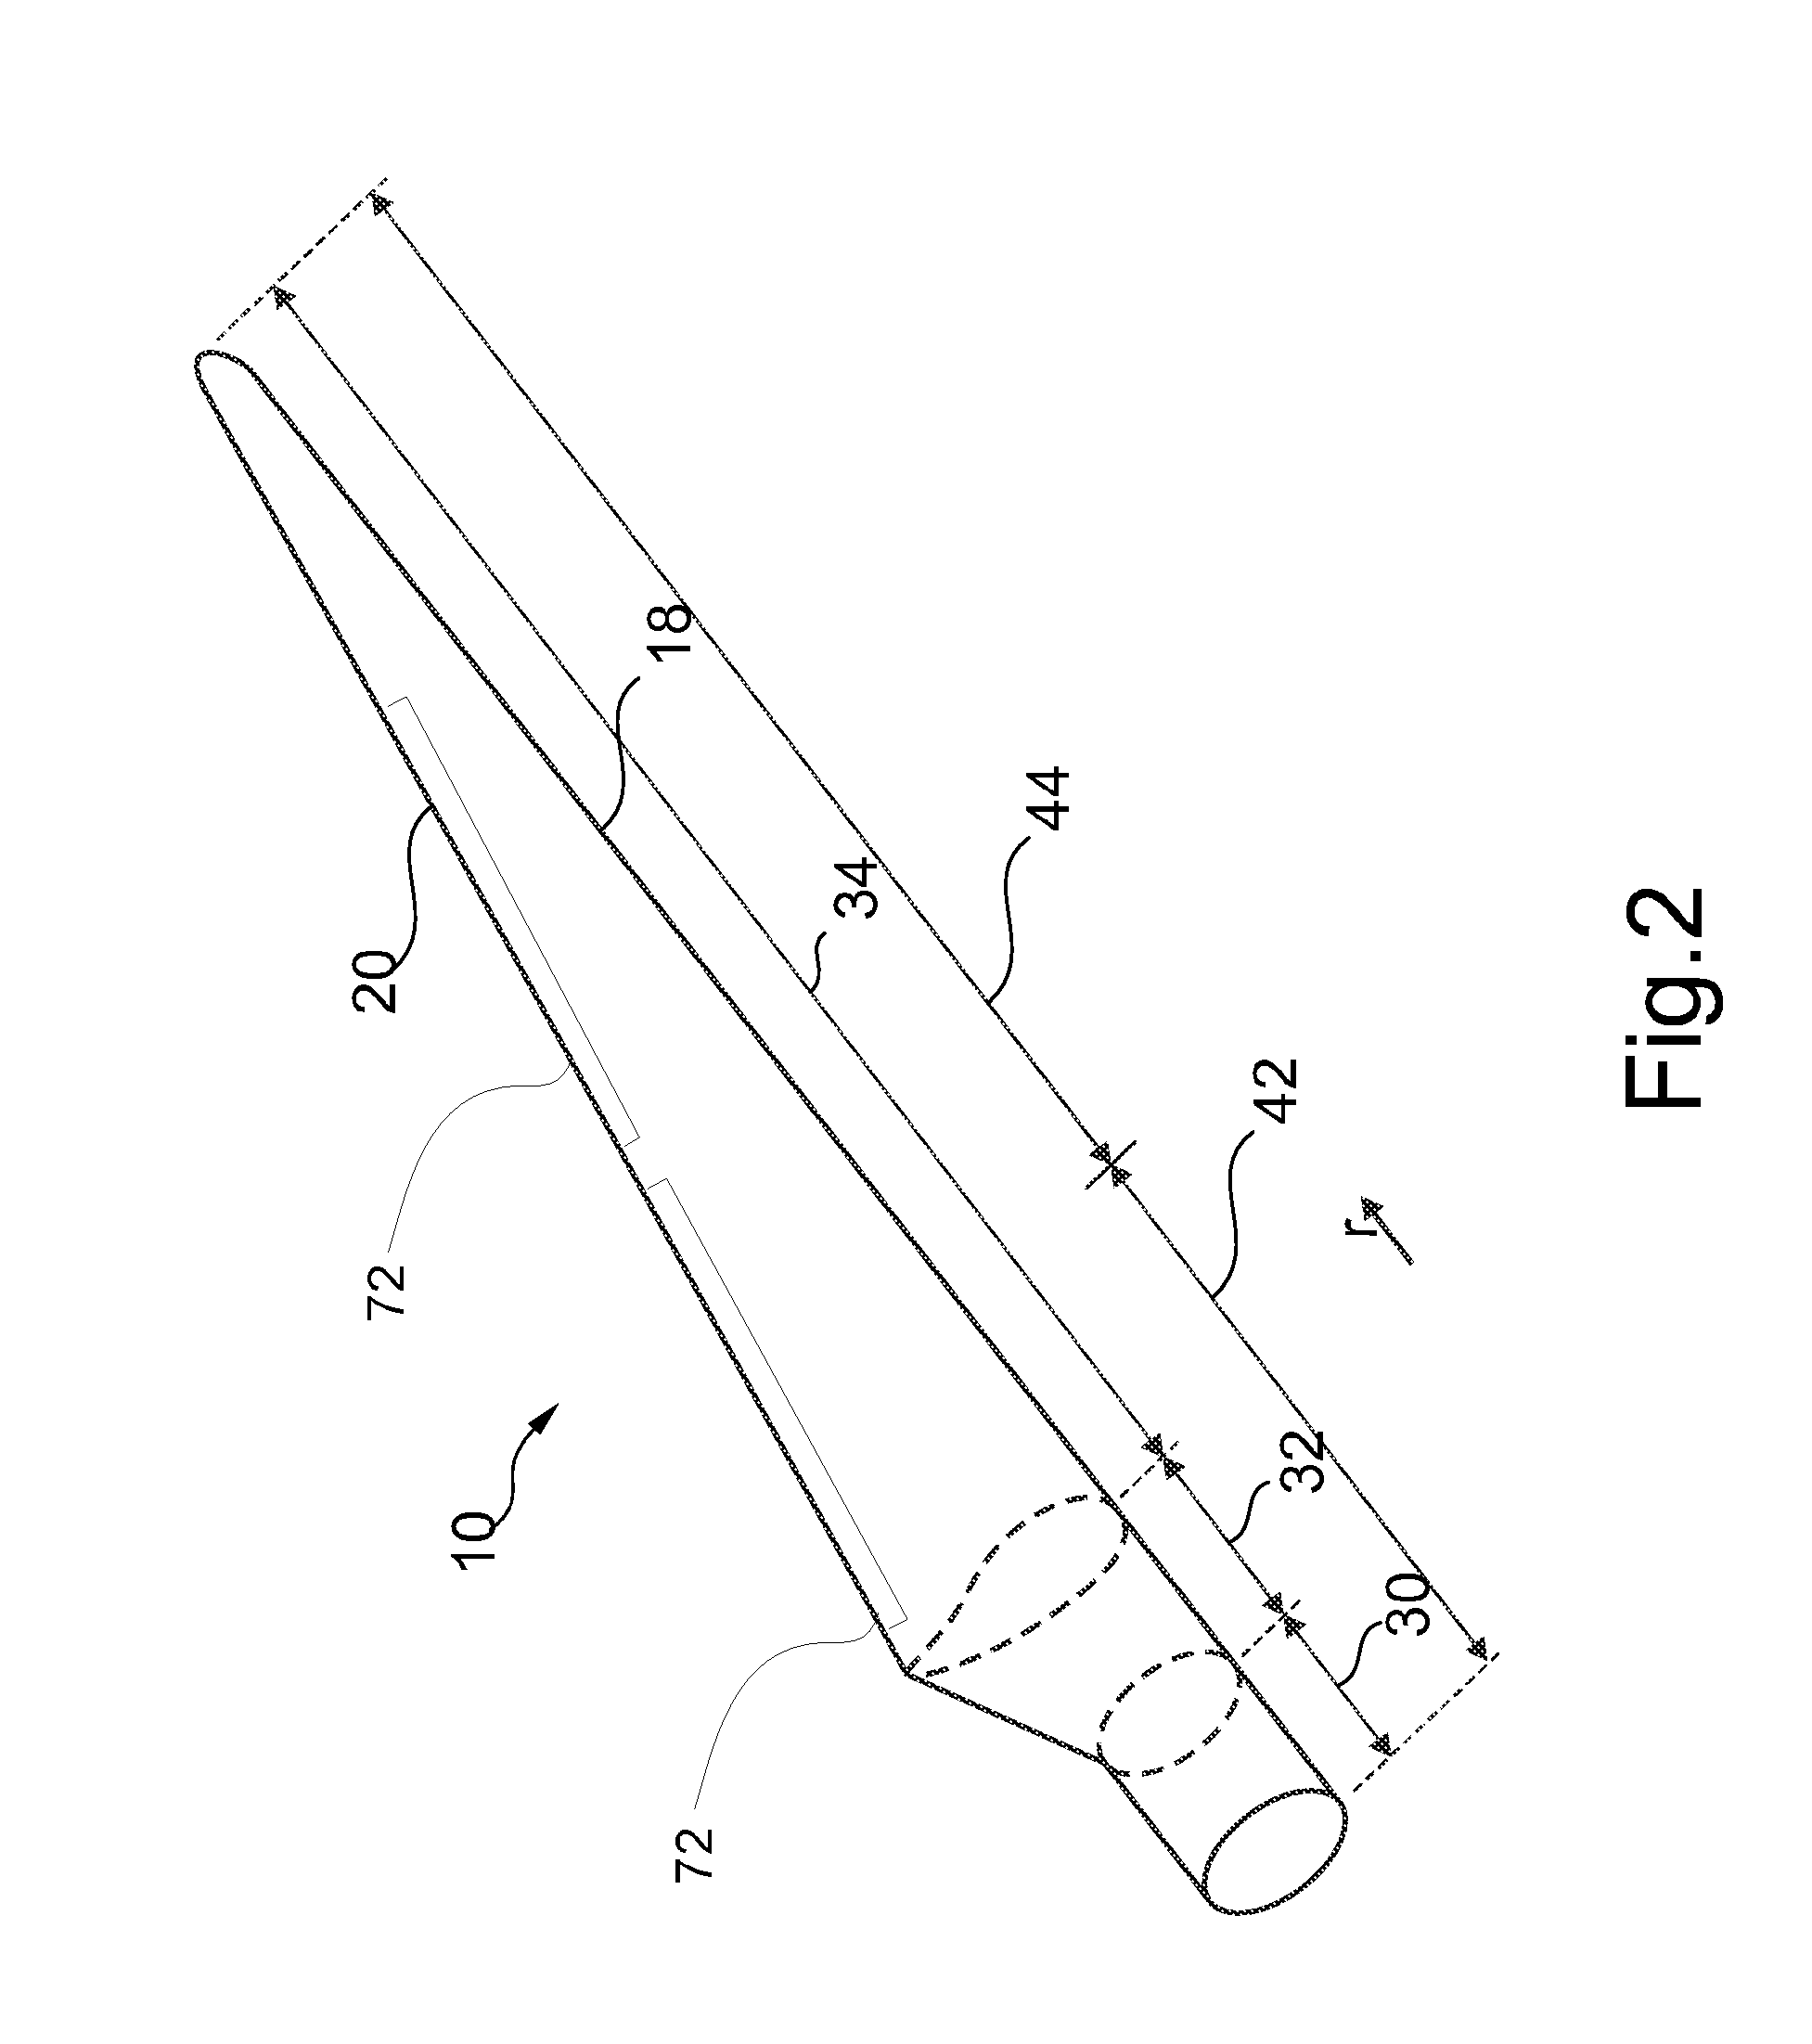 System and method for trailing edge noise reduction of a wind turbine blade